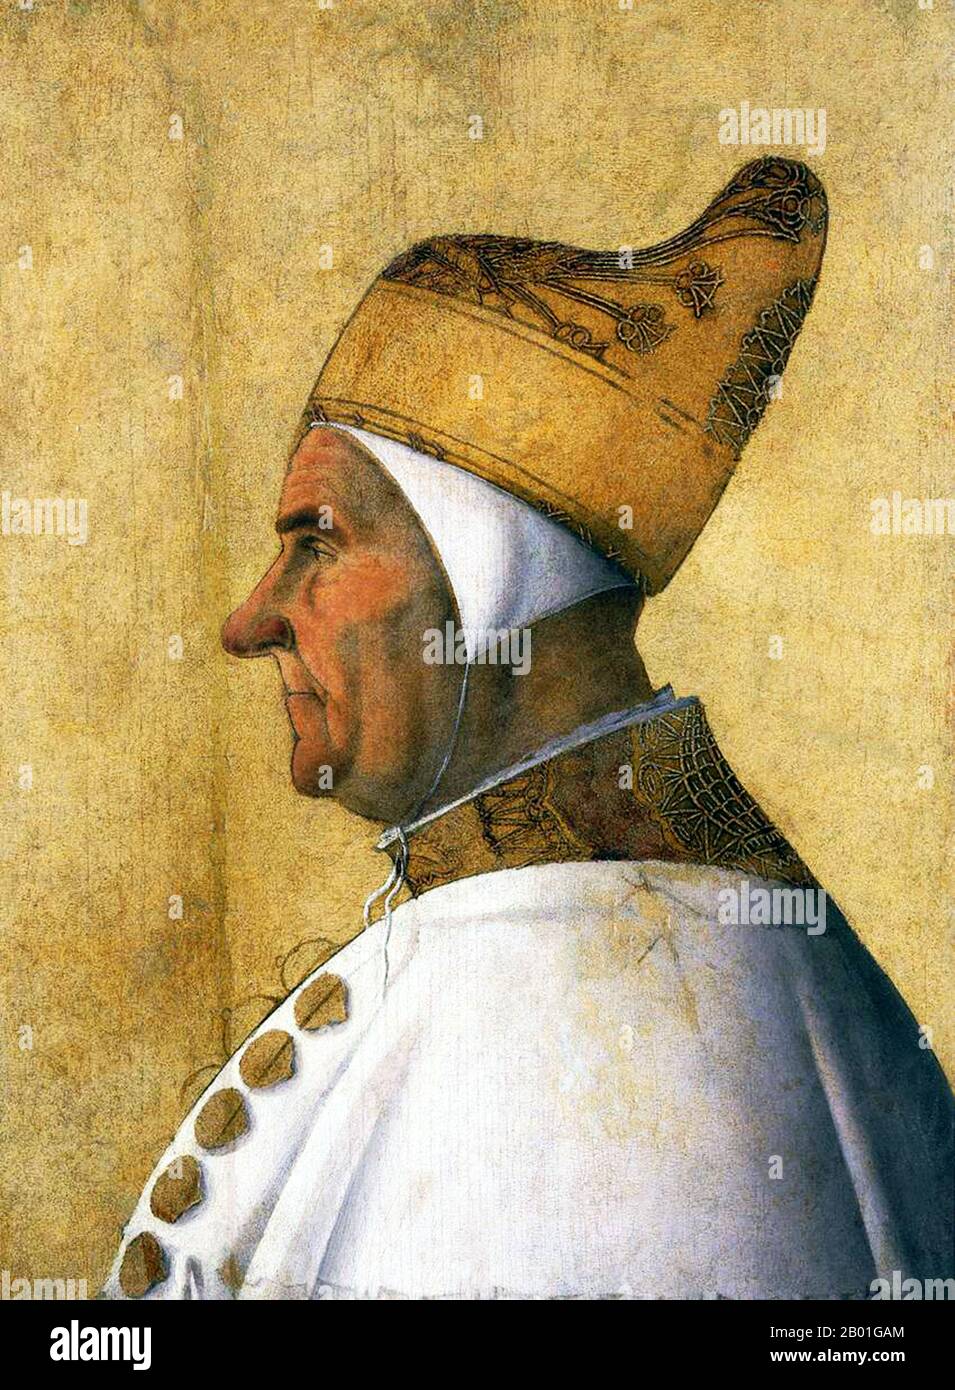 Italy/Venice: Giovanni Mocenigo (1408 - 4 November 1485), Doge of Venice (1478-1485). Tempera on panel painting by Gentile Bellini (1429-1507), c. 1478-1479.  Giovanni Mocenigo was Doge of Venice (r. 1478-1485), hailing from a very distinguished family. His brother, Pietro Mocenigo, had served as Doge before him.  He fought at sea against the Ottoman Sultan Mehmed II and on land against Ercole I d'Este, Duke of Ferrara, from whom he recaptured Rovigo and the Polesine. His dogaressa was Taddea Michiel (d. 1479), who was the last dogaressa to be crowned in Venice until Zilia Dandolo in 1557. Stock Photo